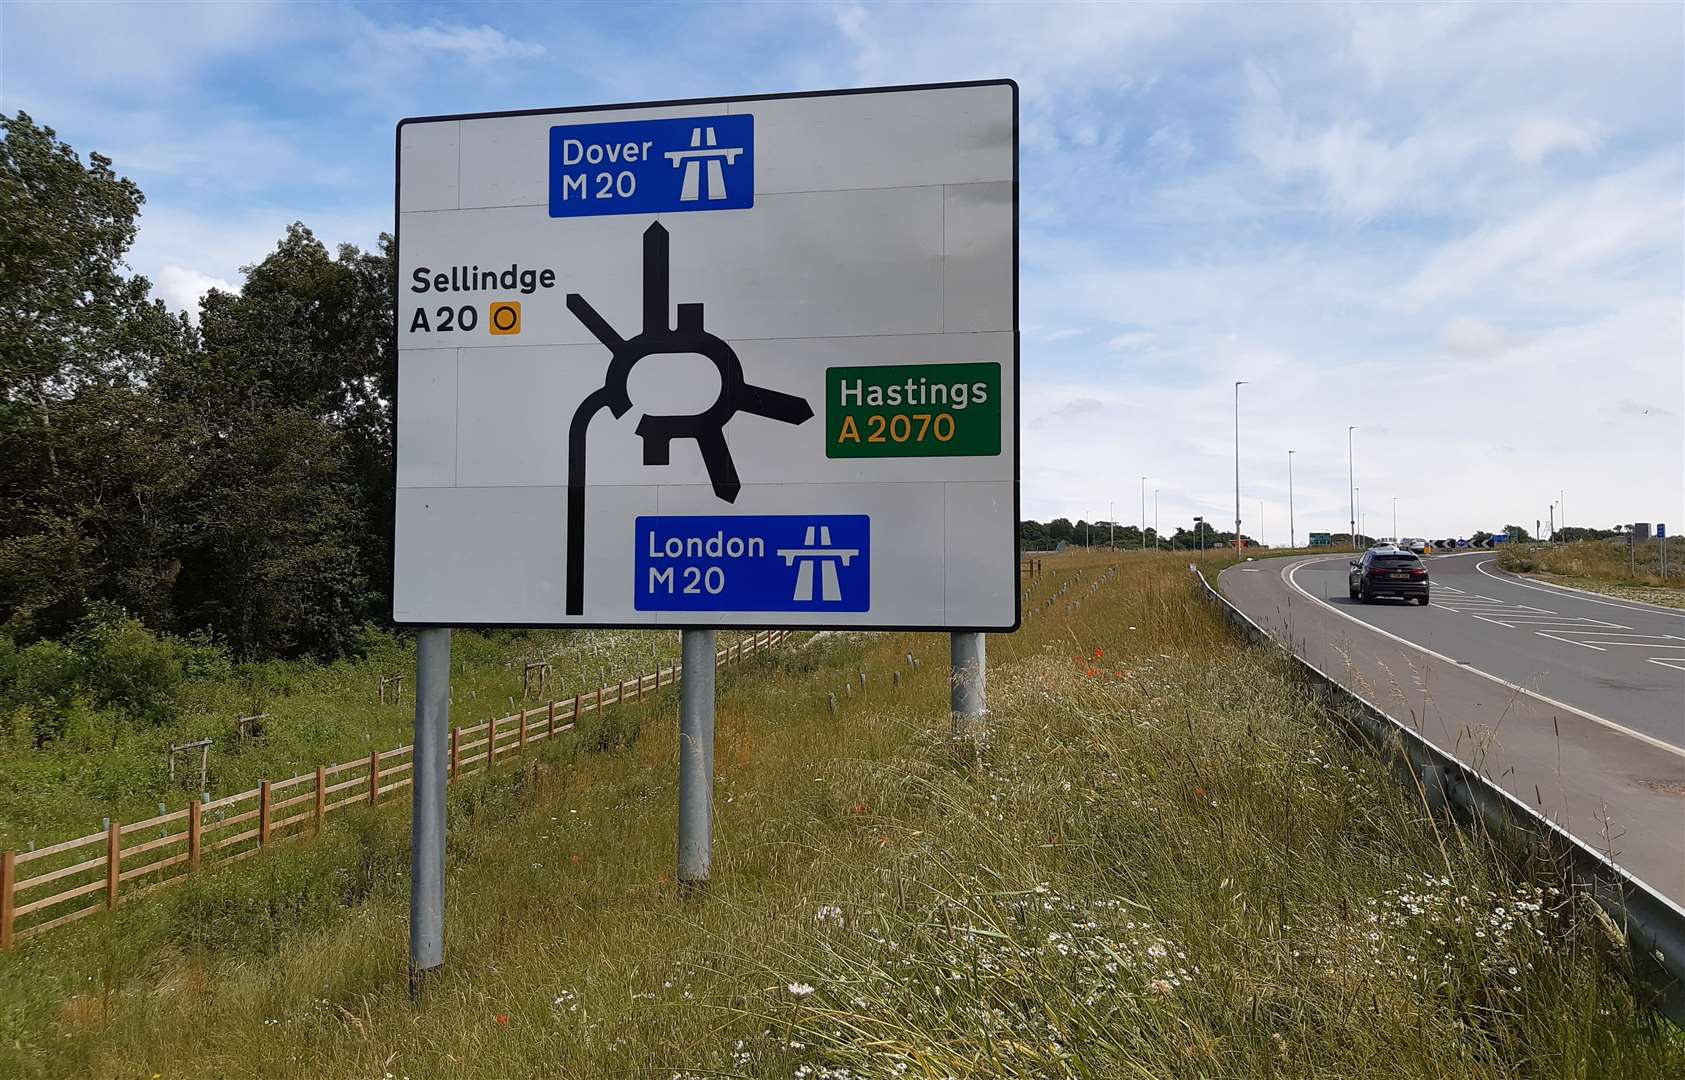 The £104m roundabout opened to traffic in late 2019